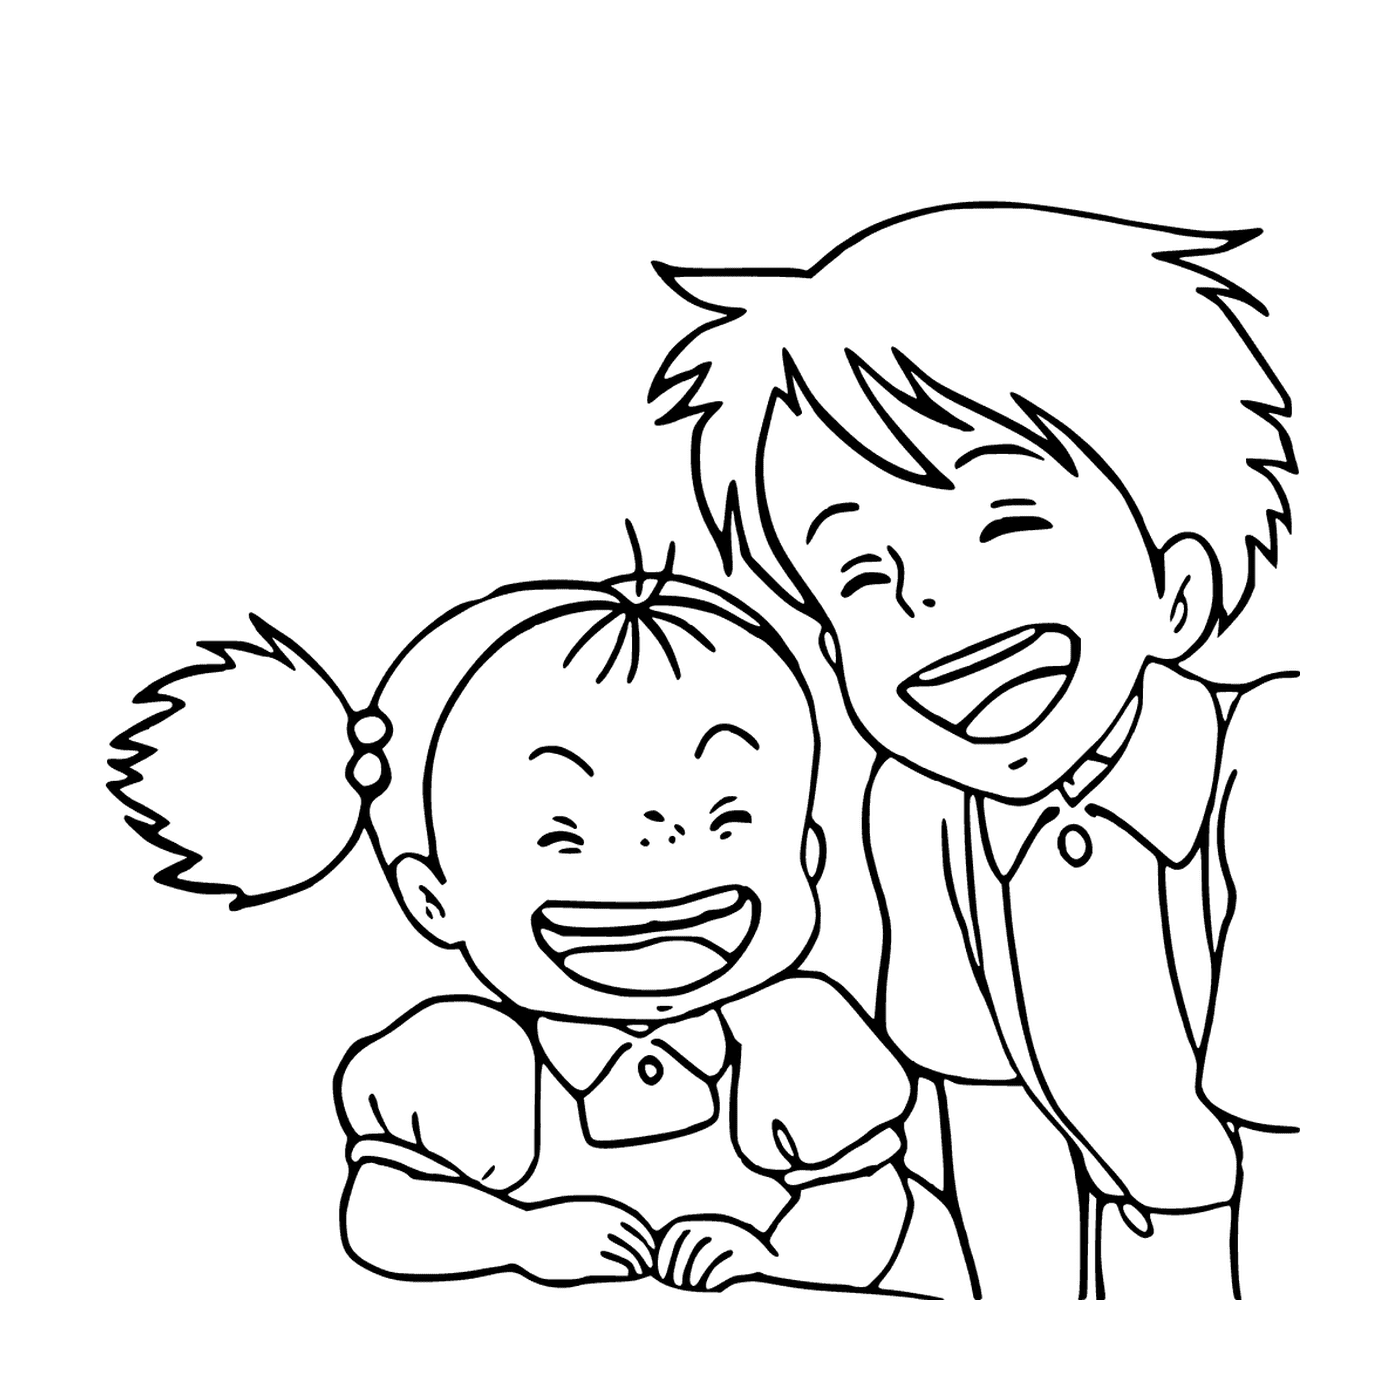  Boy and little girl laughing together 